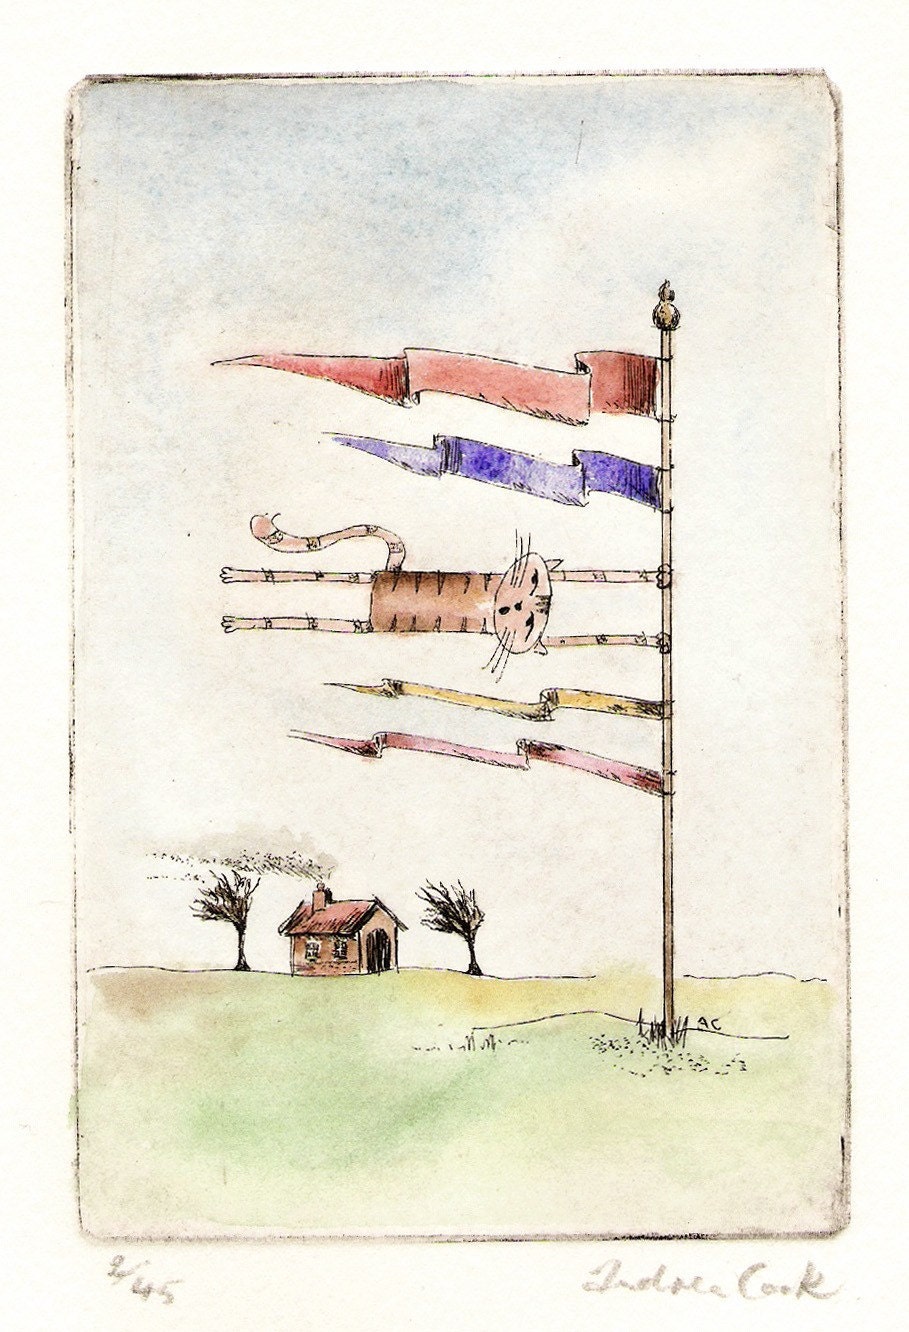 original cat etching and watercolor - it's a bit windy